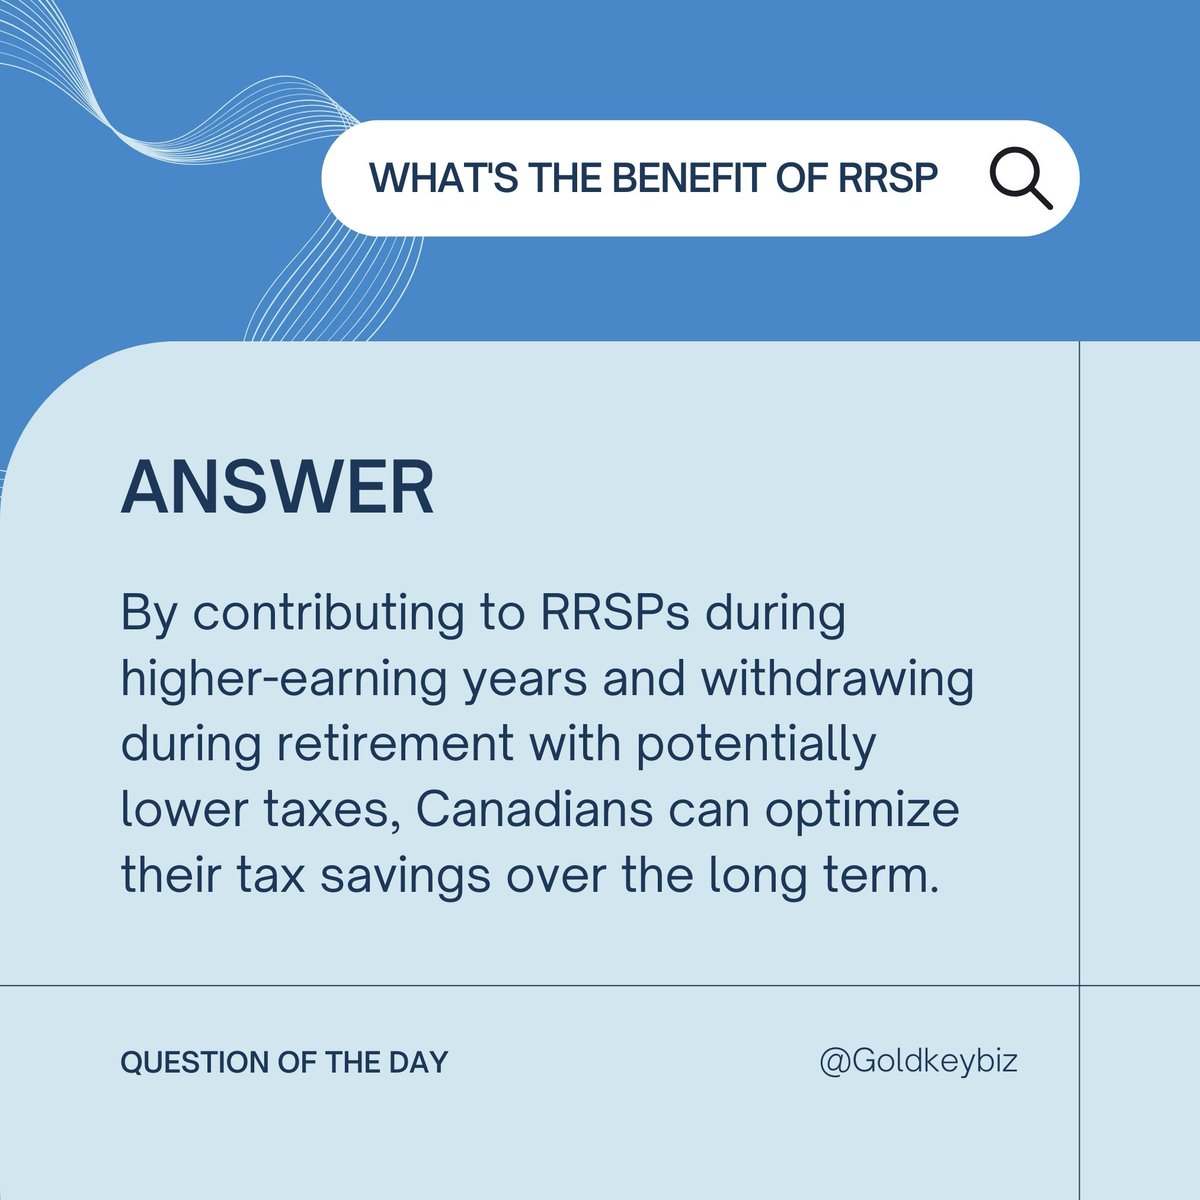 Unlock the power of RRSPs: Contribute wisely during your peak earning years and enjoy tax-efficient withdrawals in retirement. 🌟💰 

#TaxSavings #RetirementPlanning  #Financialassistance #Workforcesupport #Taxcredits #Incomesupport #FinancialHelp #WorkforceIncentive